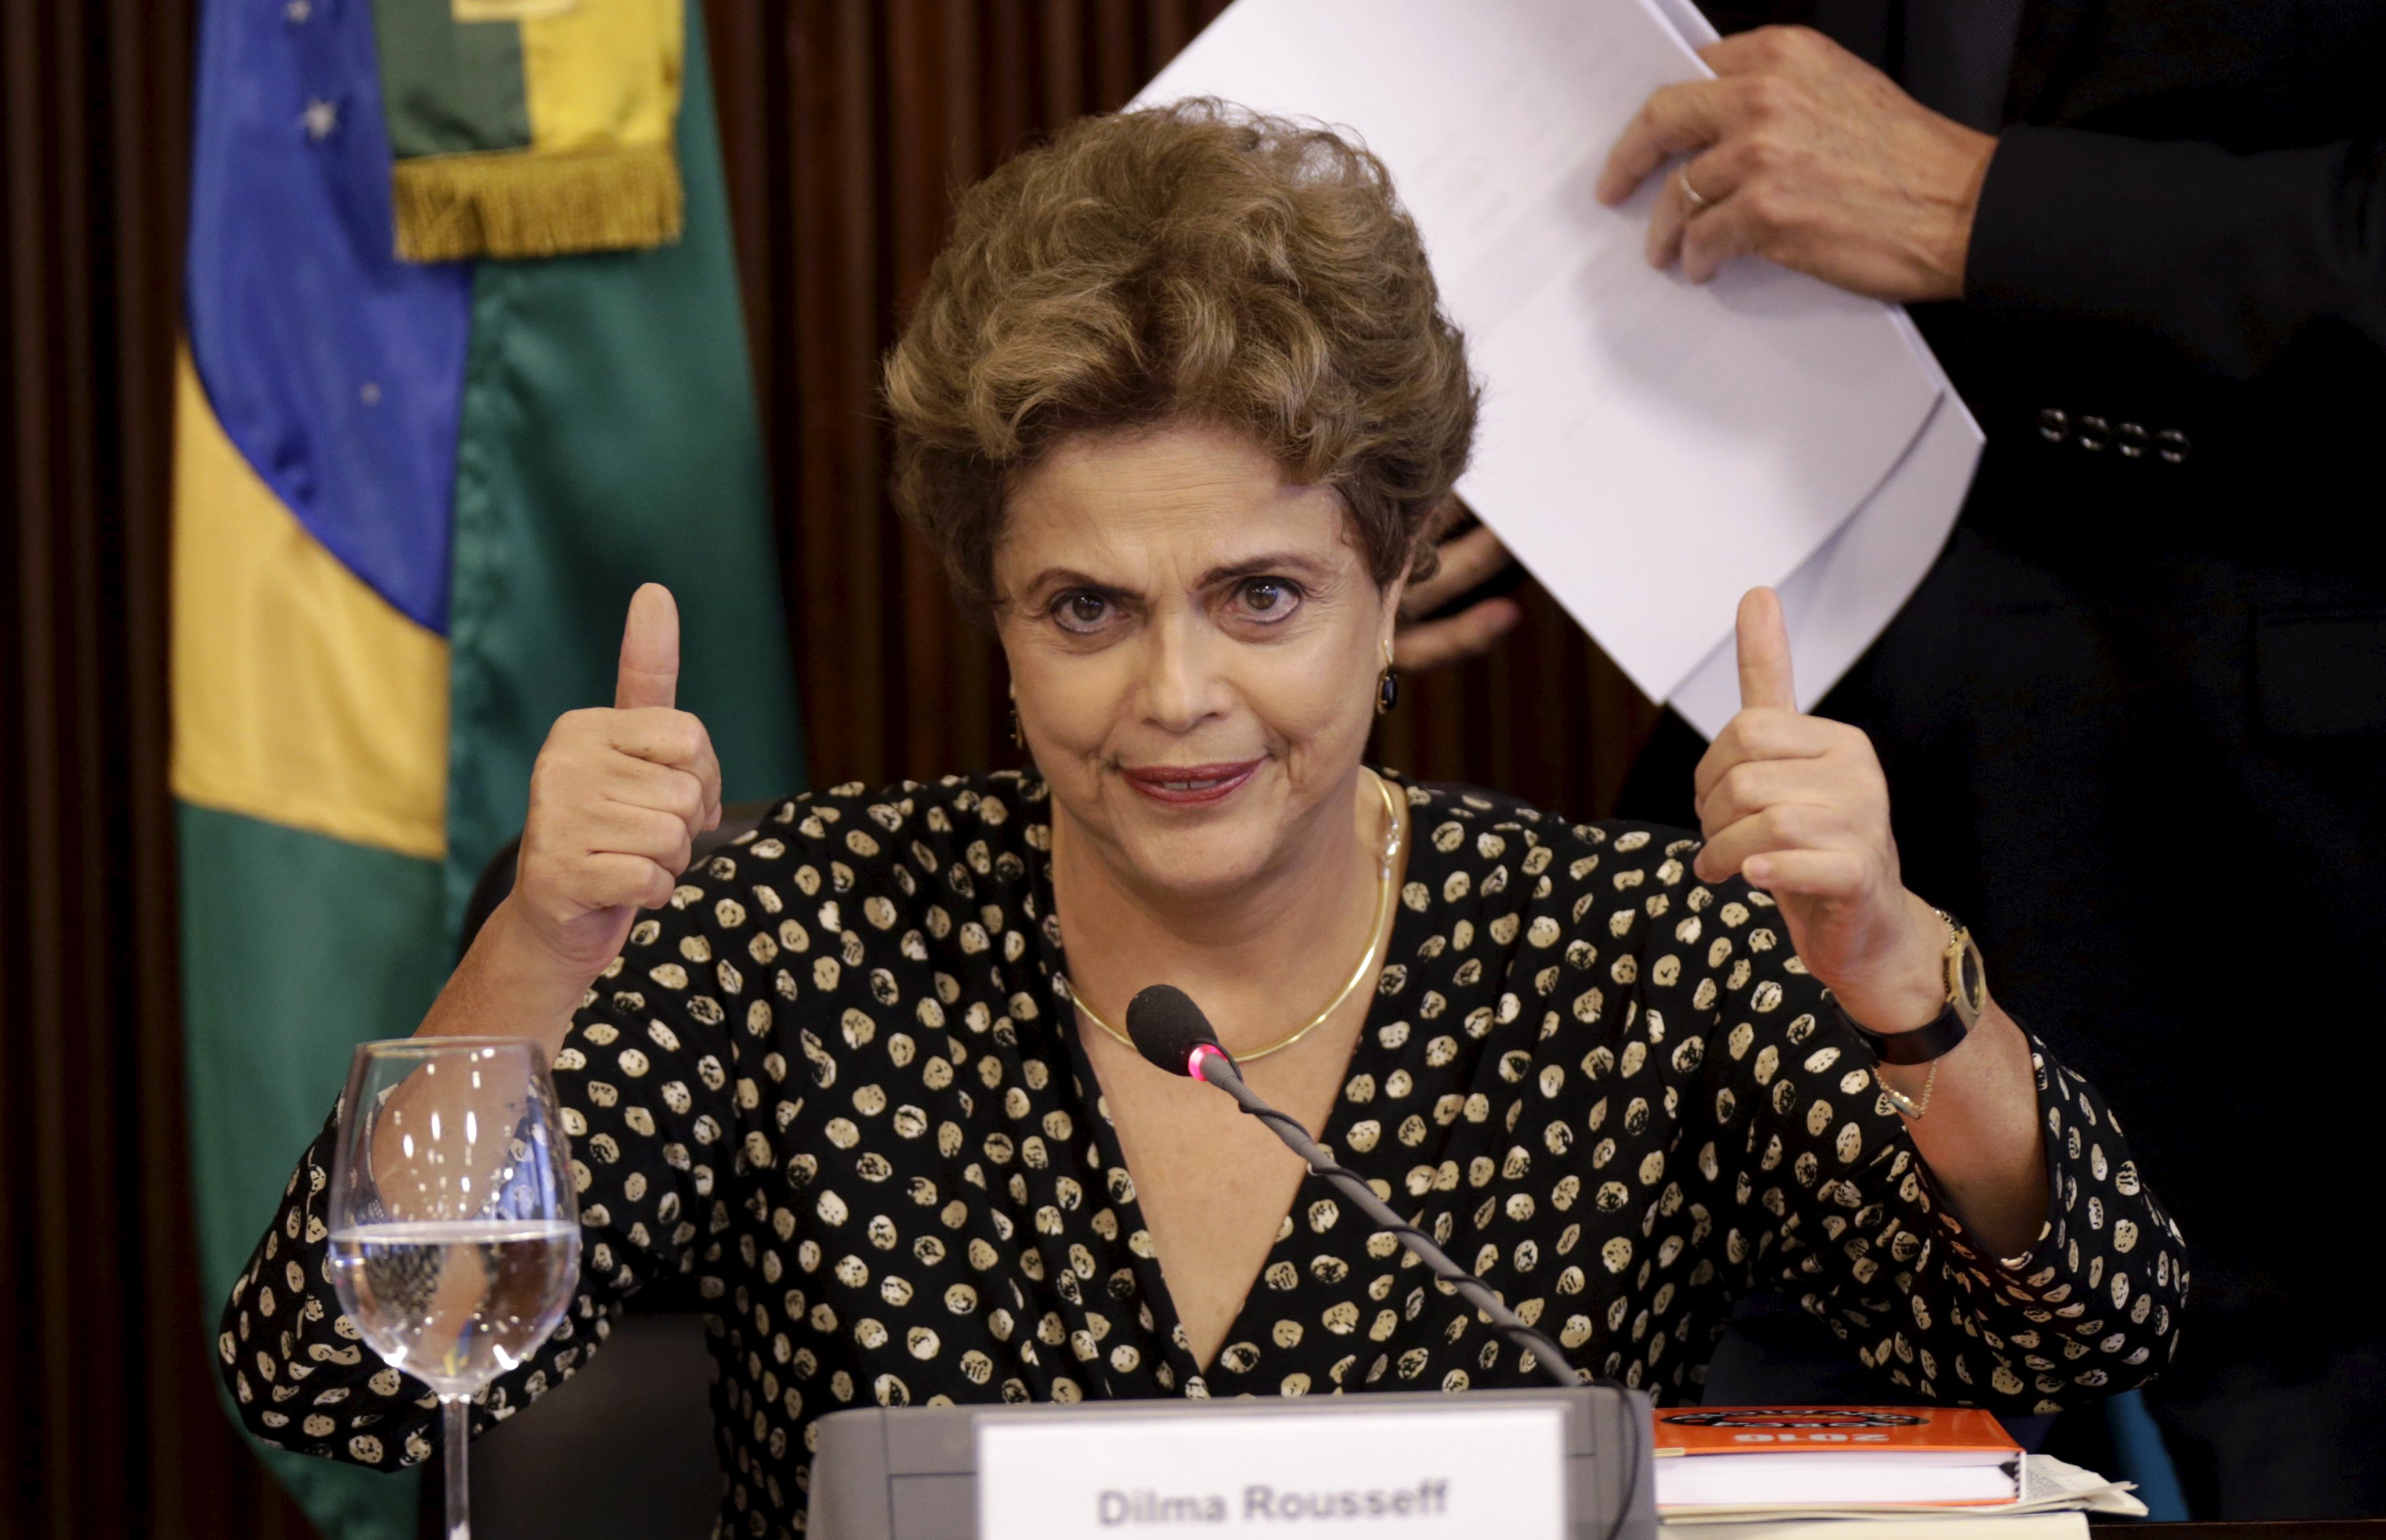 Brazilian President Dilma Rousseff gestures during a meeting in Brasilia, Brazil, December 15, 2015. A key lawmaker congressional commission in Brazil budget recommended approve the accounts of the Government of Dilma Rousseff in 2014, which could undermine the efforts of the opponents of the president.